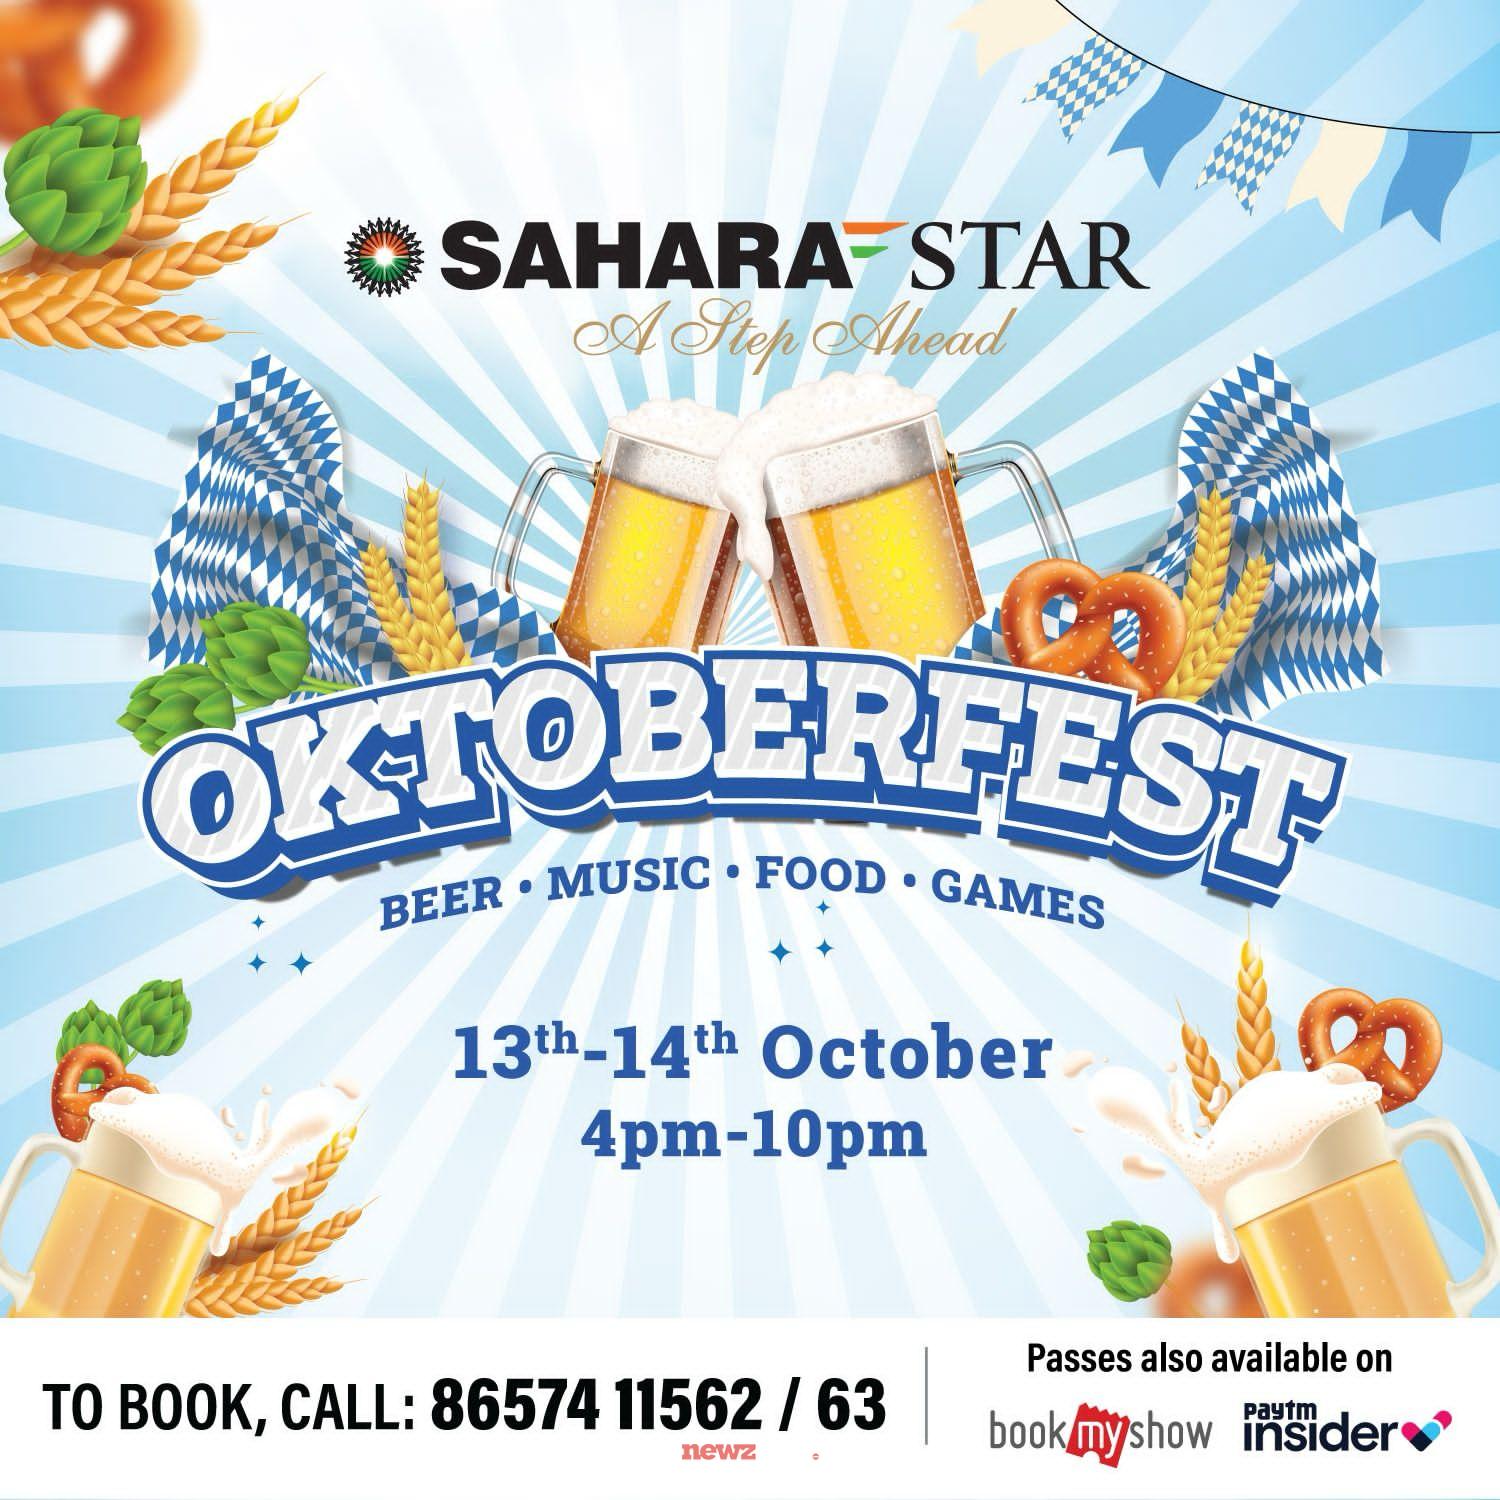 Celebrate Oktoberfest at Sahara Star : A Feast of Beer, Games, and Live Music!